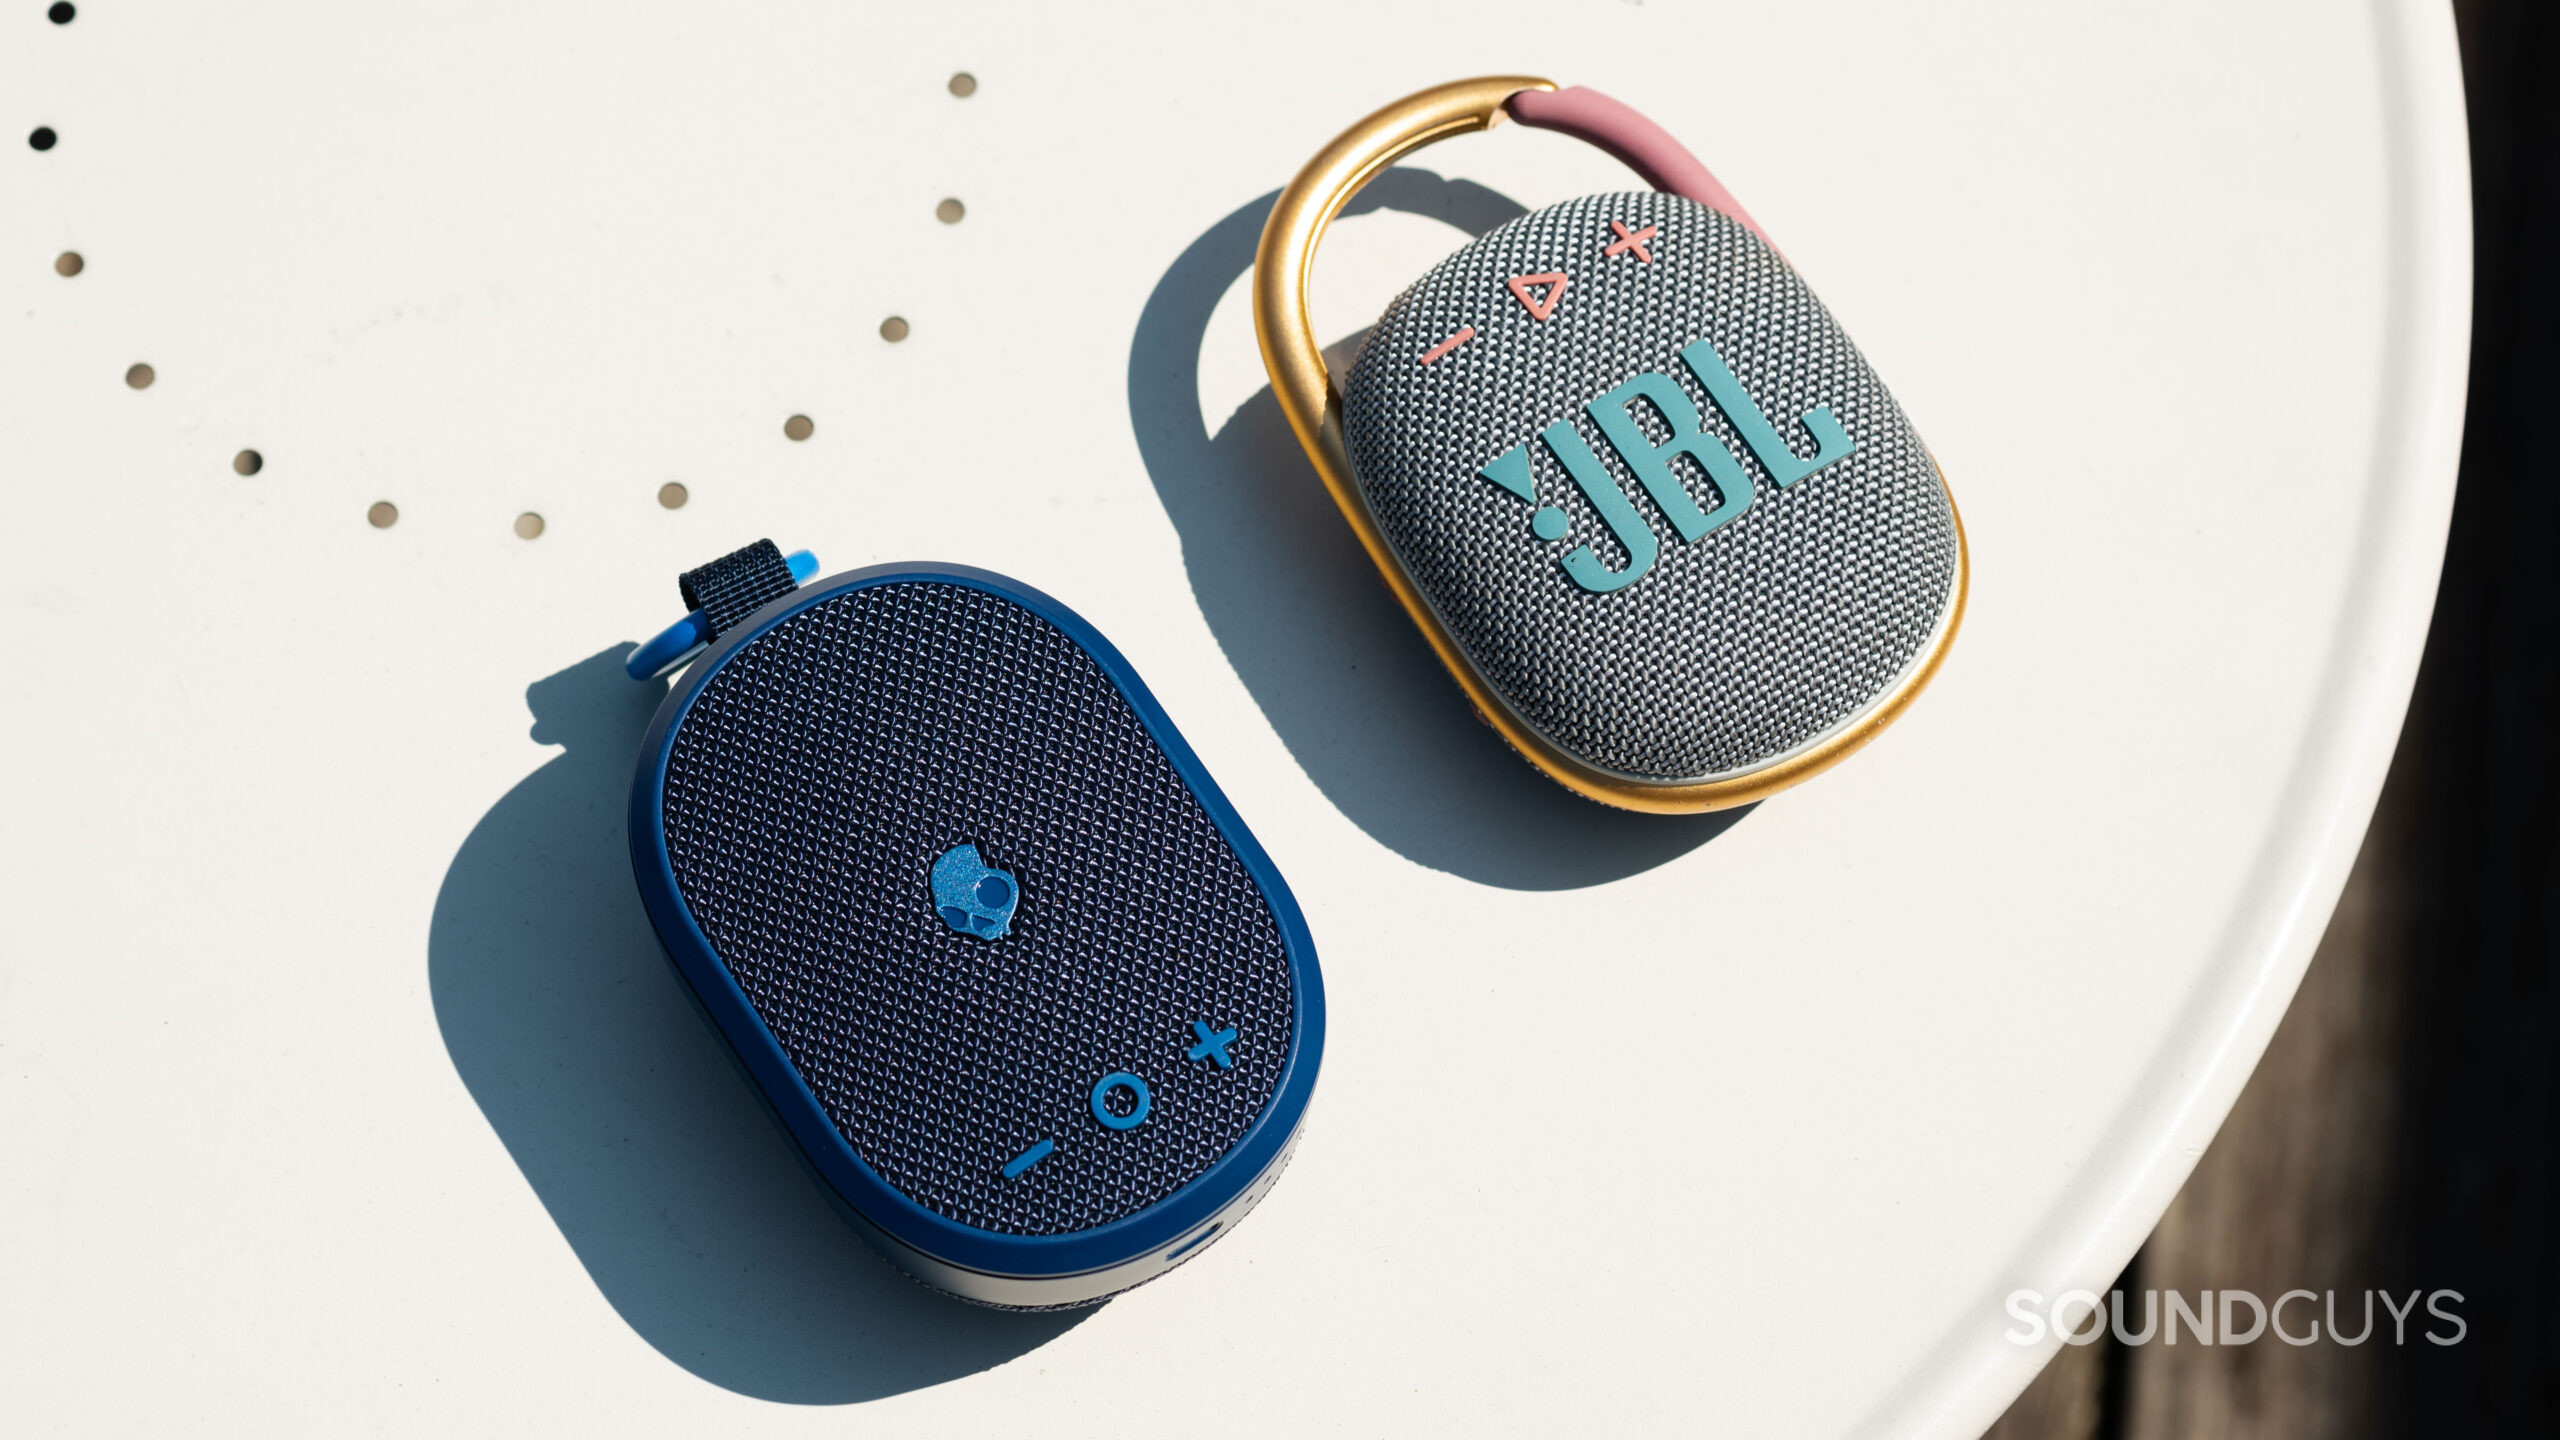 The Skullcandy Kilo and JBL Clip 4 Bluetooth speakers next to each other.